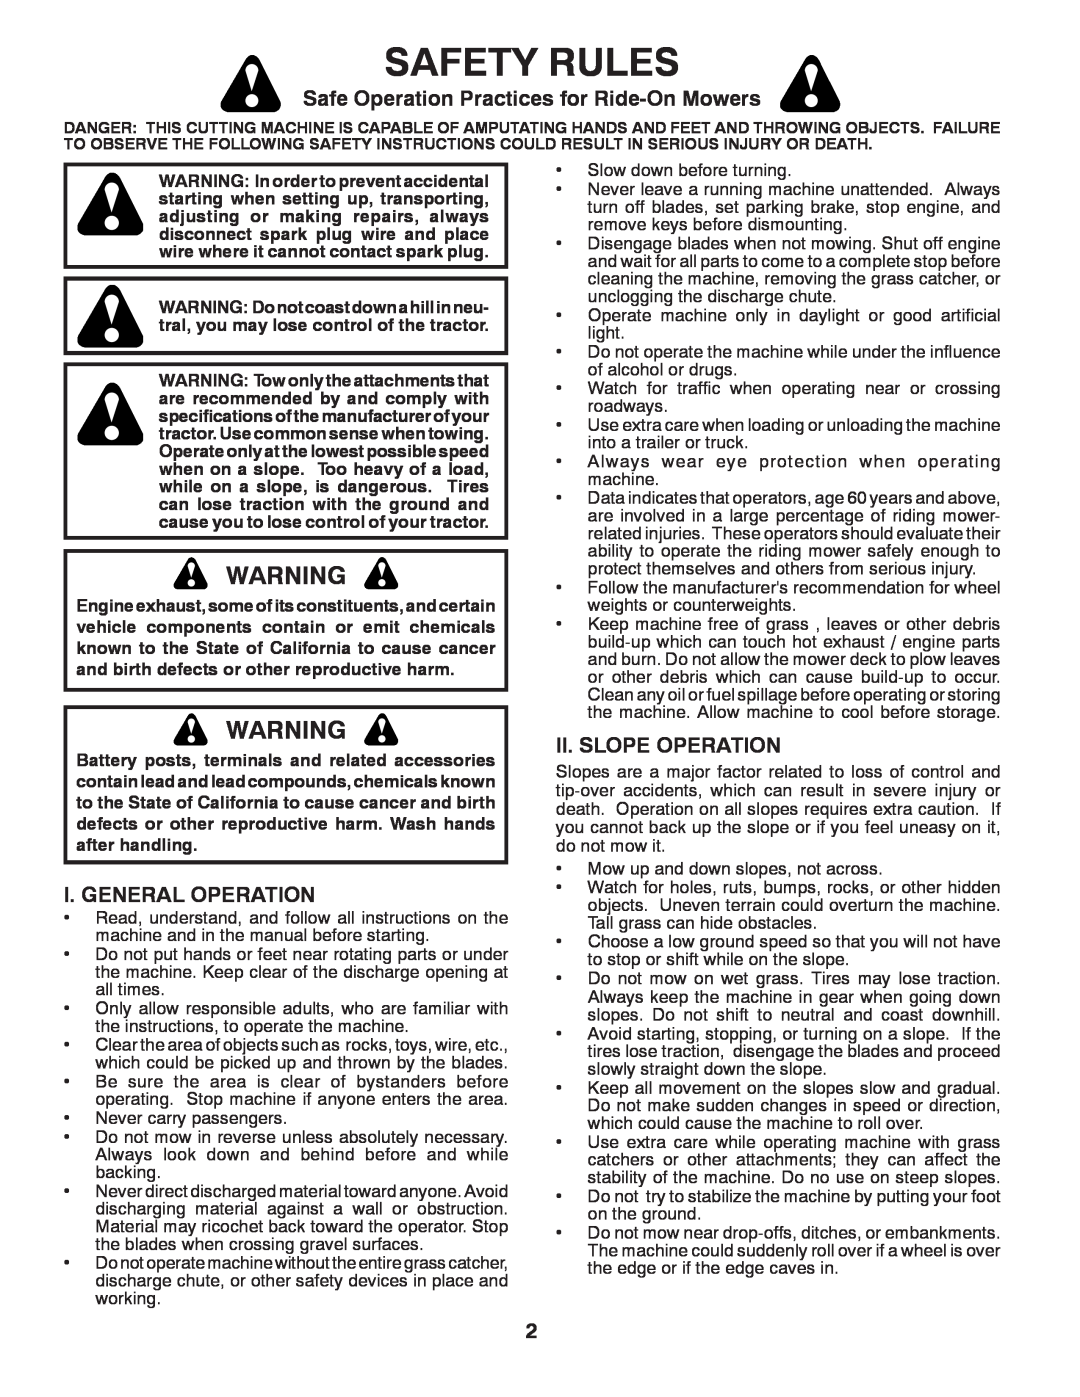 Ariens 935335 42 manual Safety Rules, Safe Operation Practices for Ride-OnMowers, I. General Operation, Ii. Slope Operation 